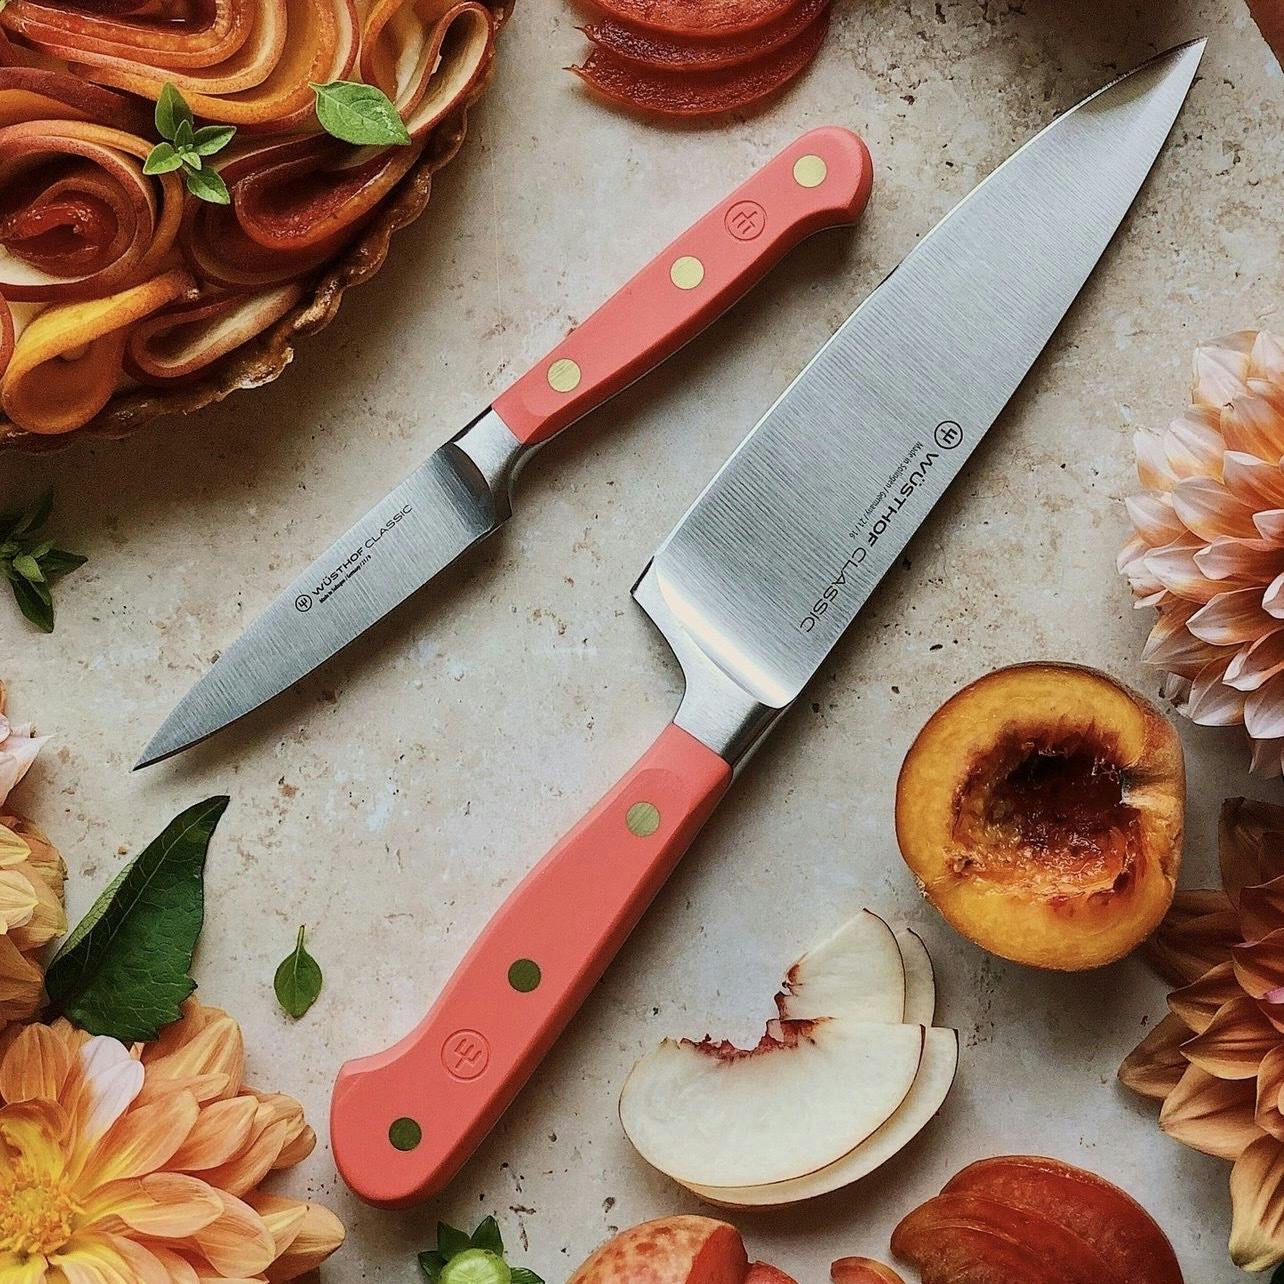 Coral Peach knives next to flowers, peaches and apple slices